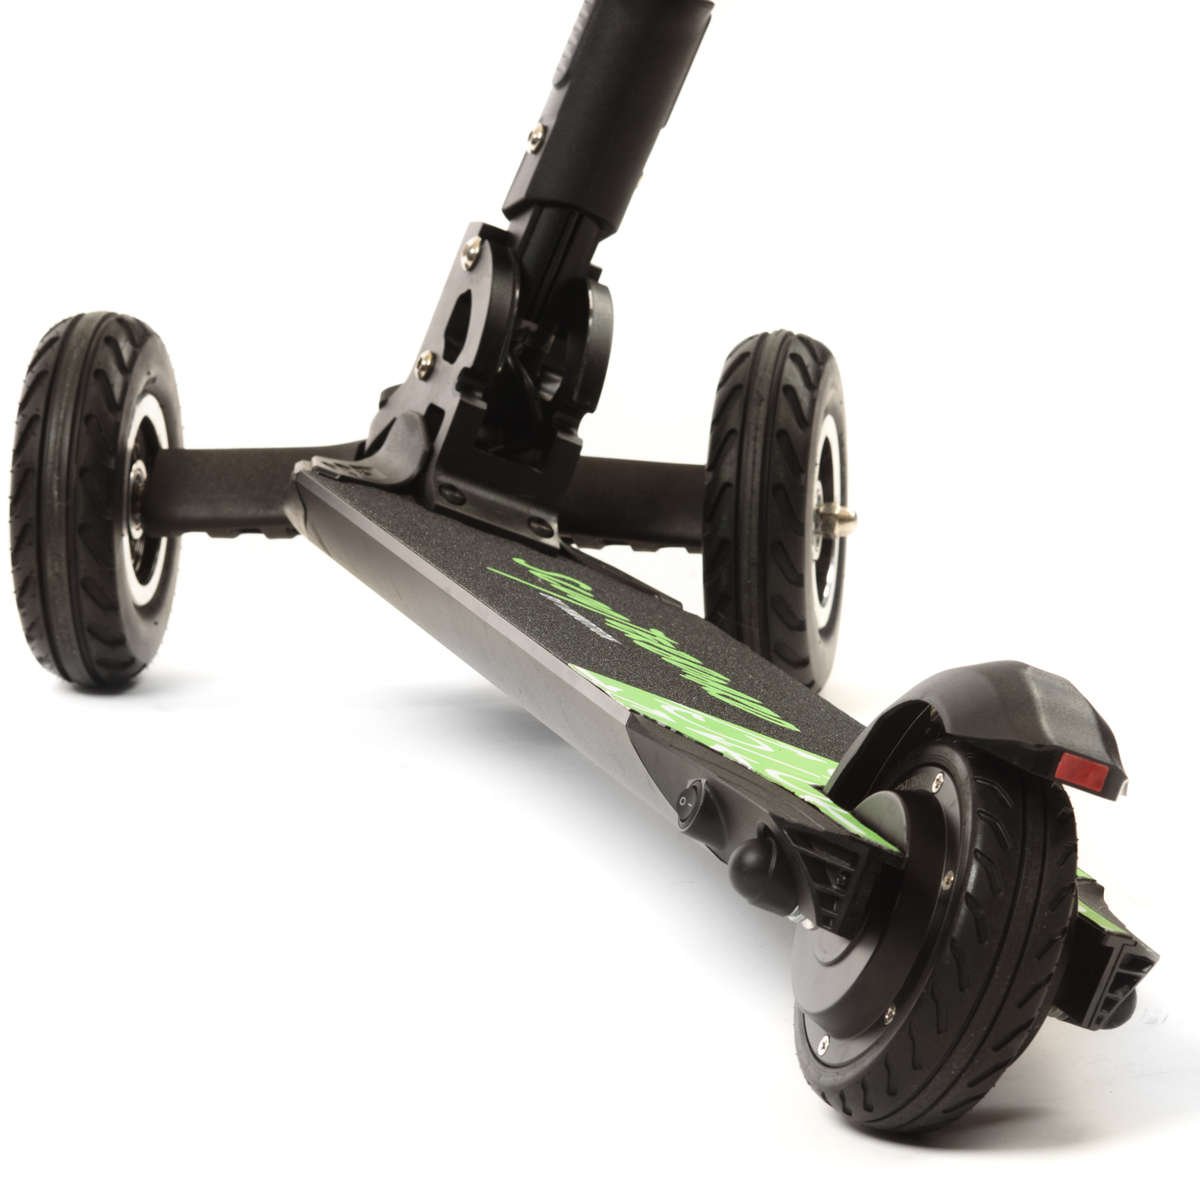 Scooterboard electric skateboard 3 wheel scooter hybrid by InMotion